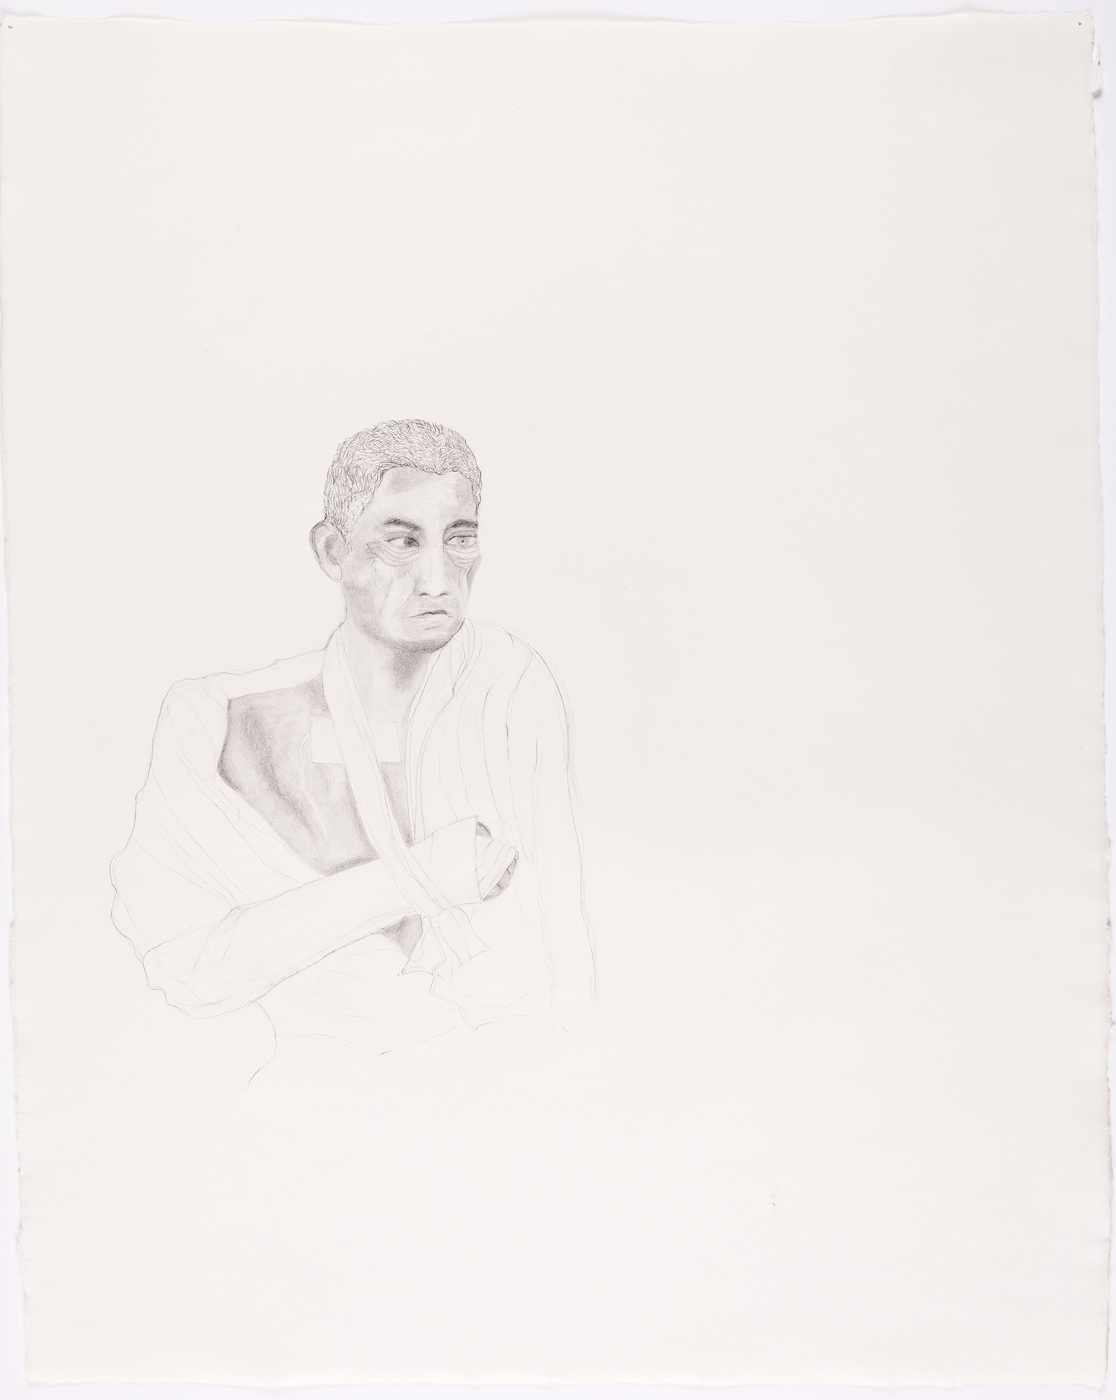  Bandaged Soldier No. 4. 2003. Pencil on Paper. 26" x 21" 